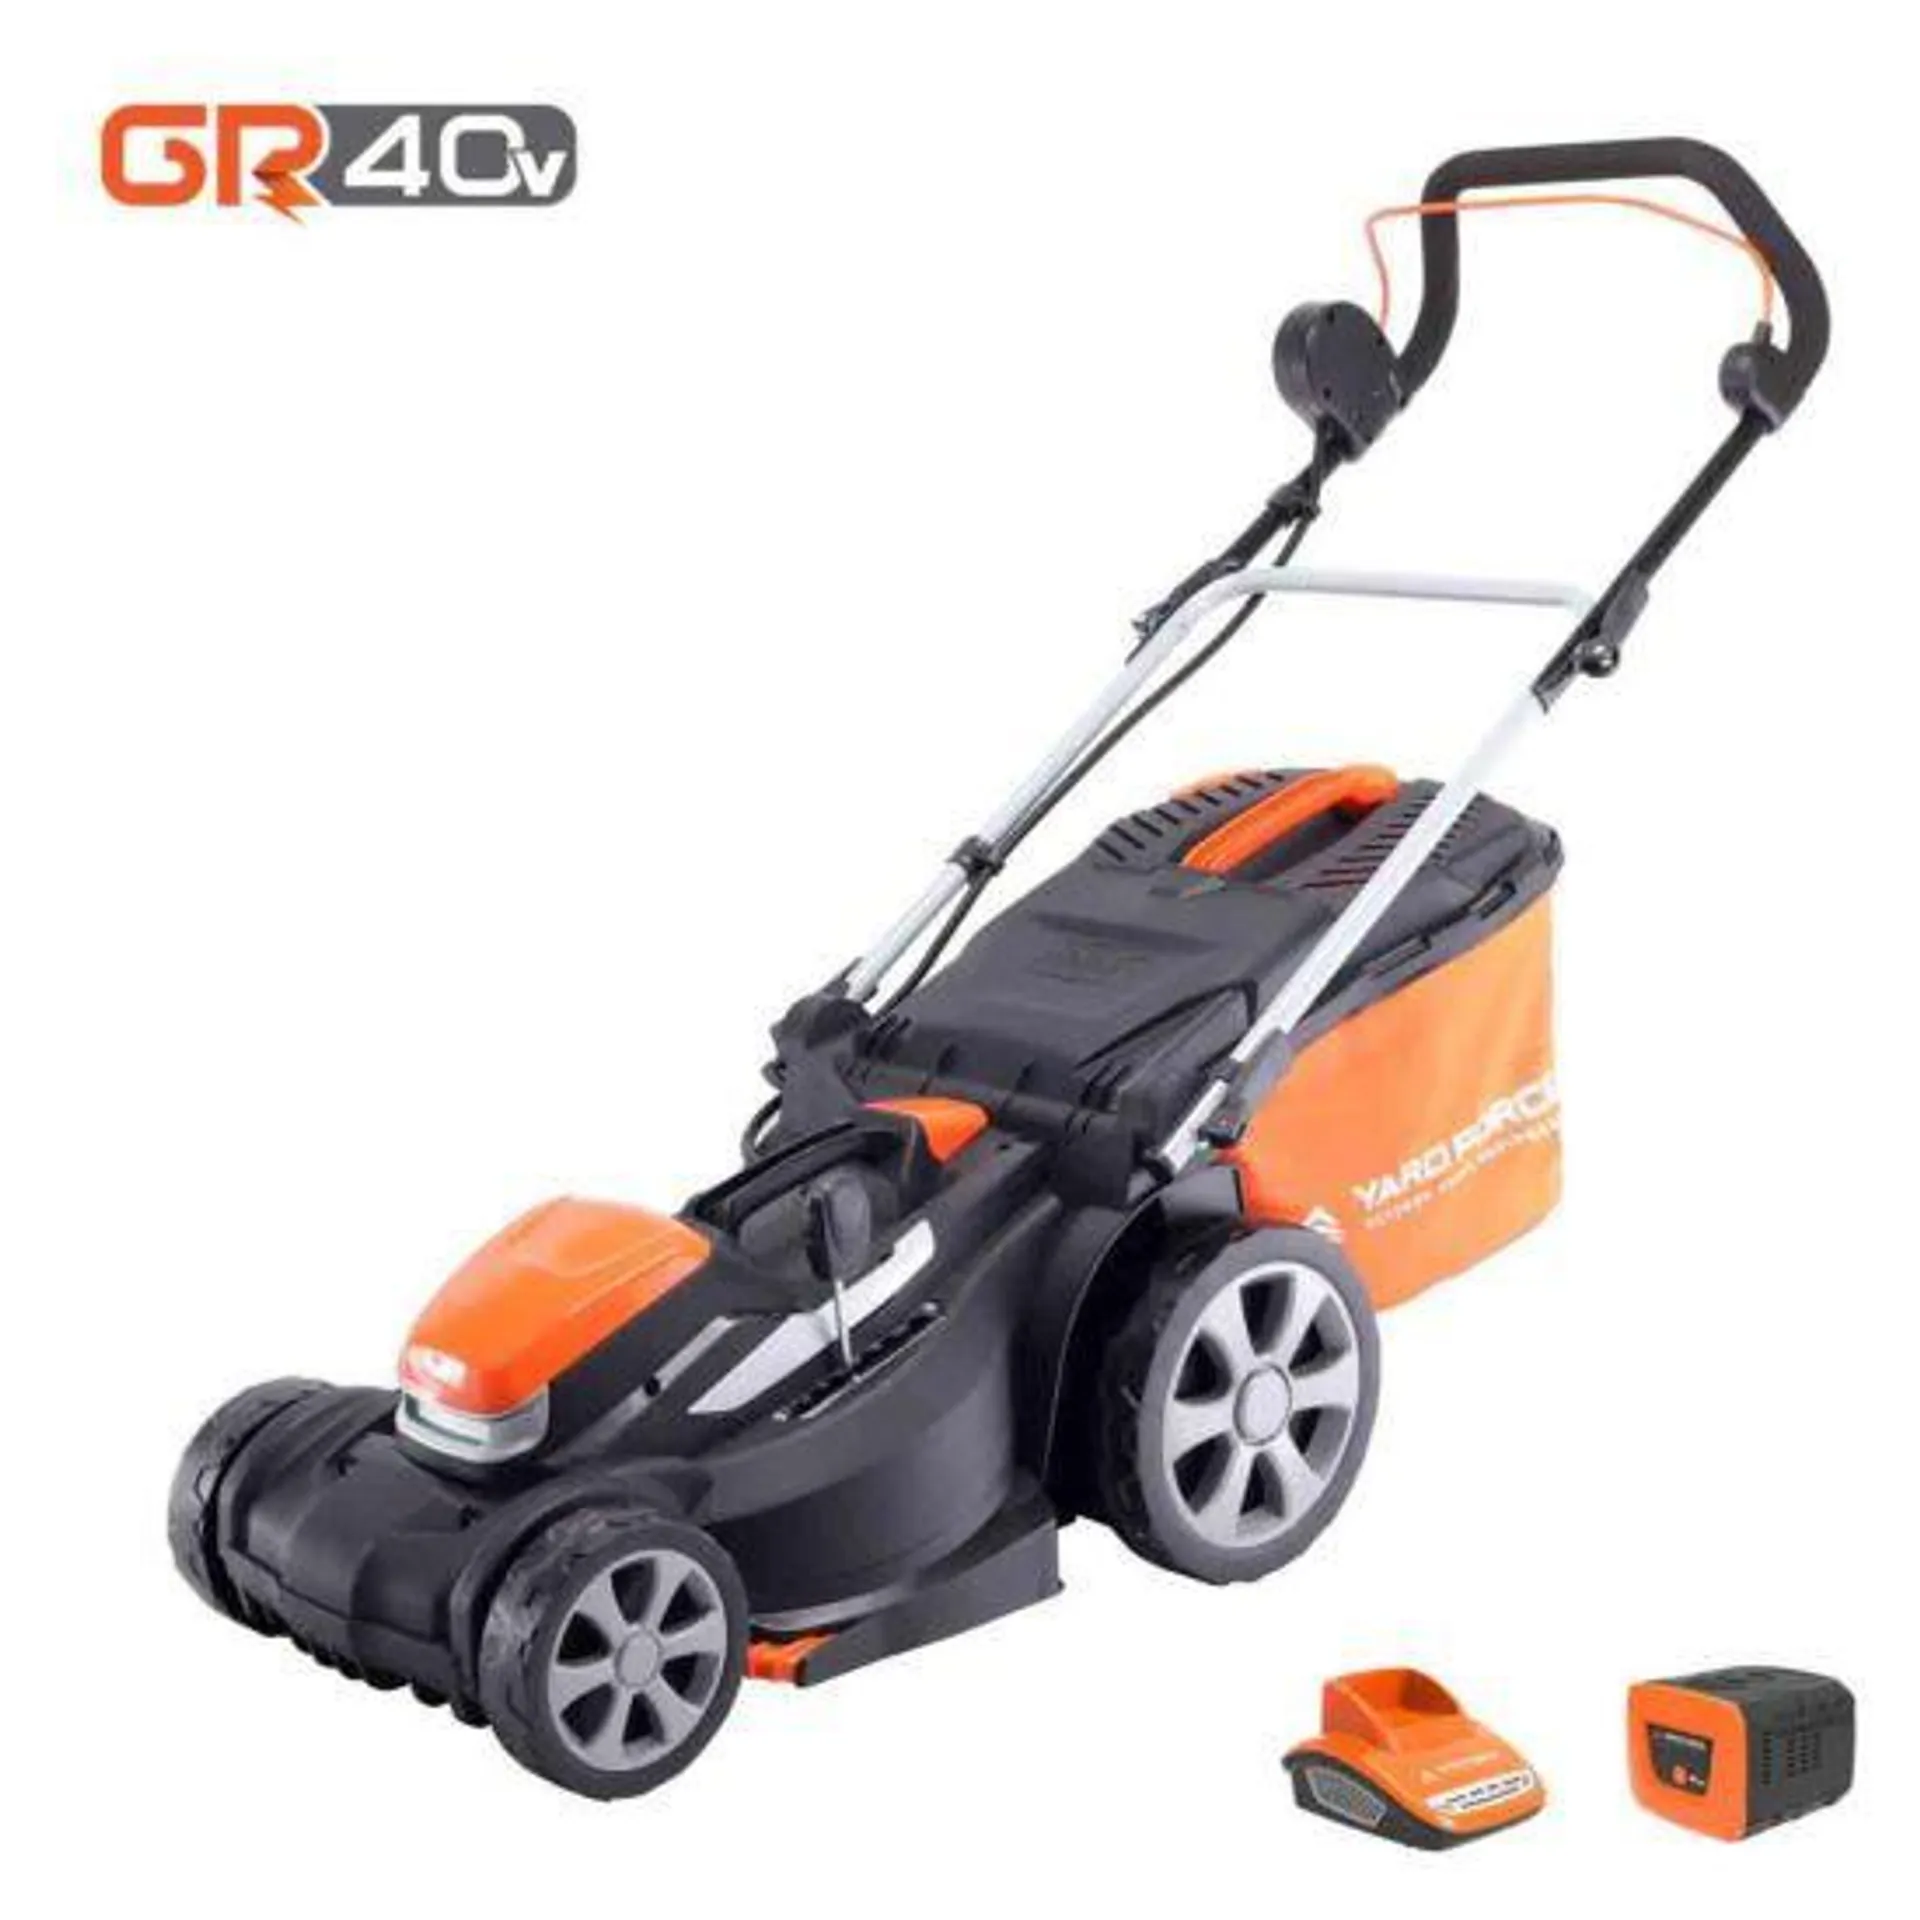 Yard Force 40V 34Cm Cordless Lawnmower W/ Lithium Ion Battery & Quick Charger - Orange & Black